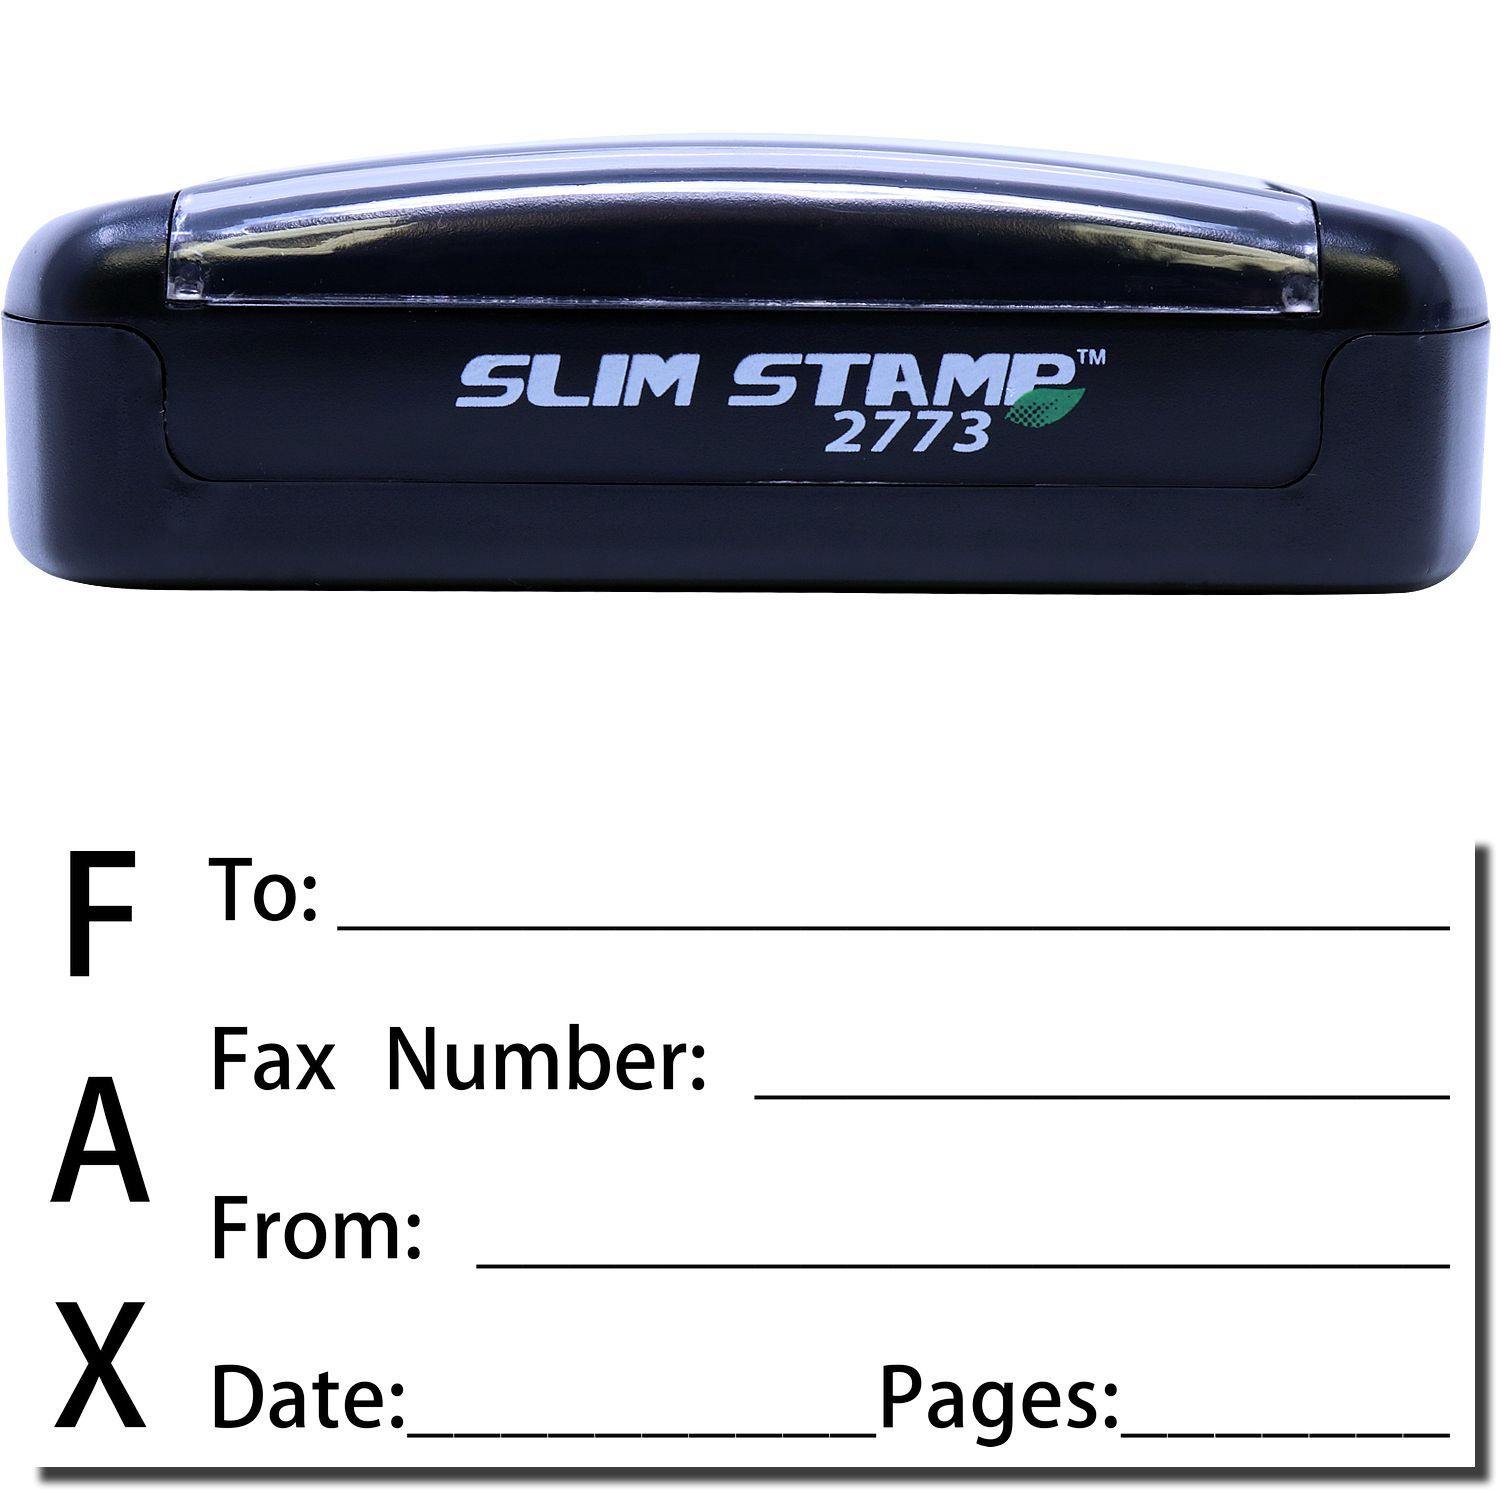 A stock office pre-inked stamp with a stamped image showing how the text "FAX" is displayed vertically with a form for filling in details of fax like whom the fax is being sent to, fax number, who is sending the fax, date, and number of pages is shown after stamping from it.